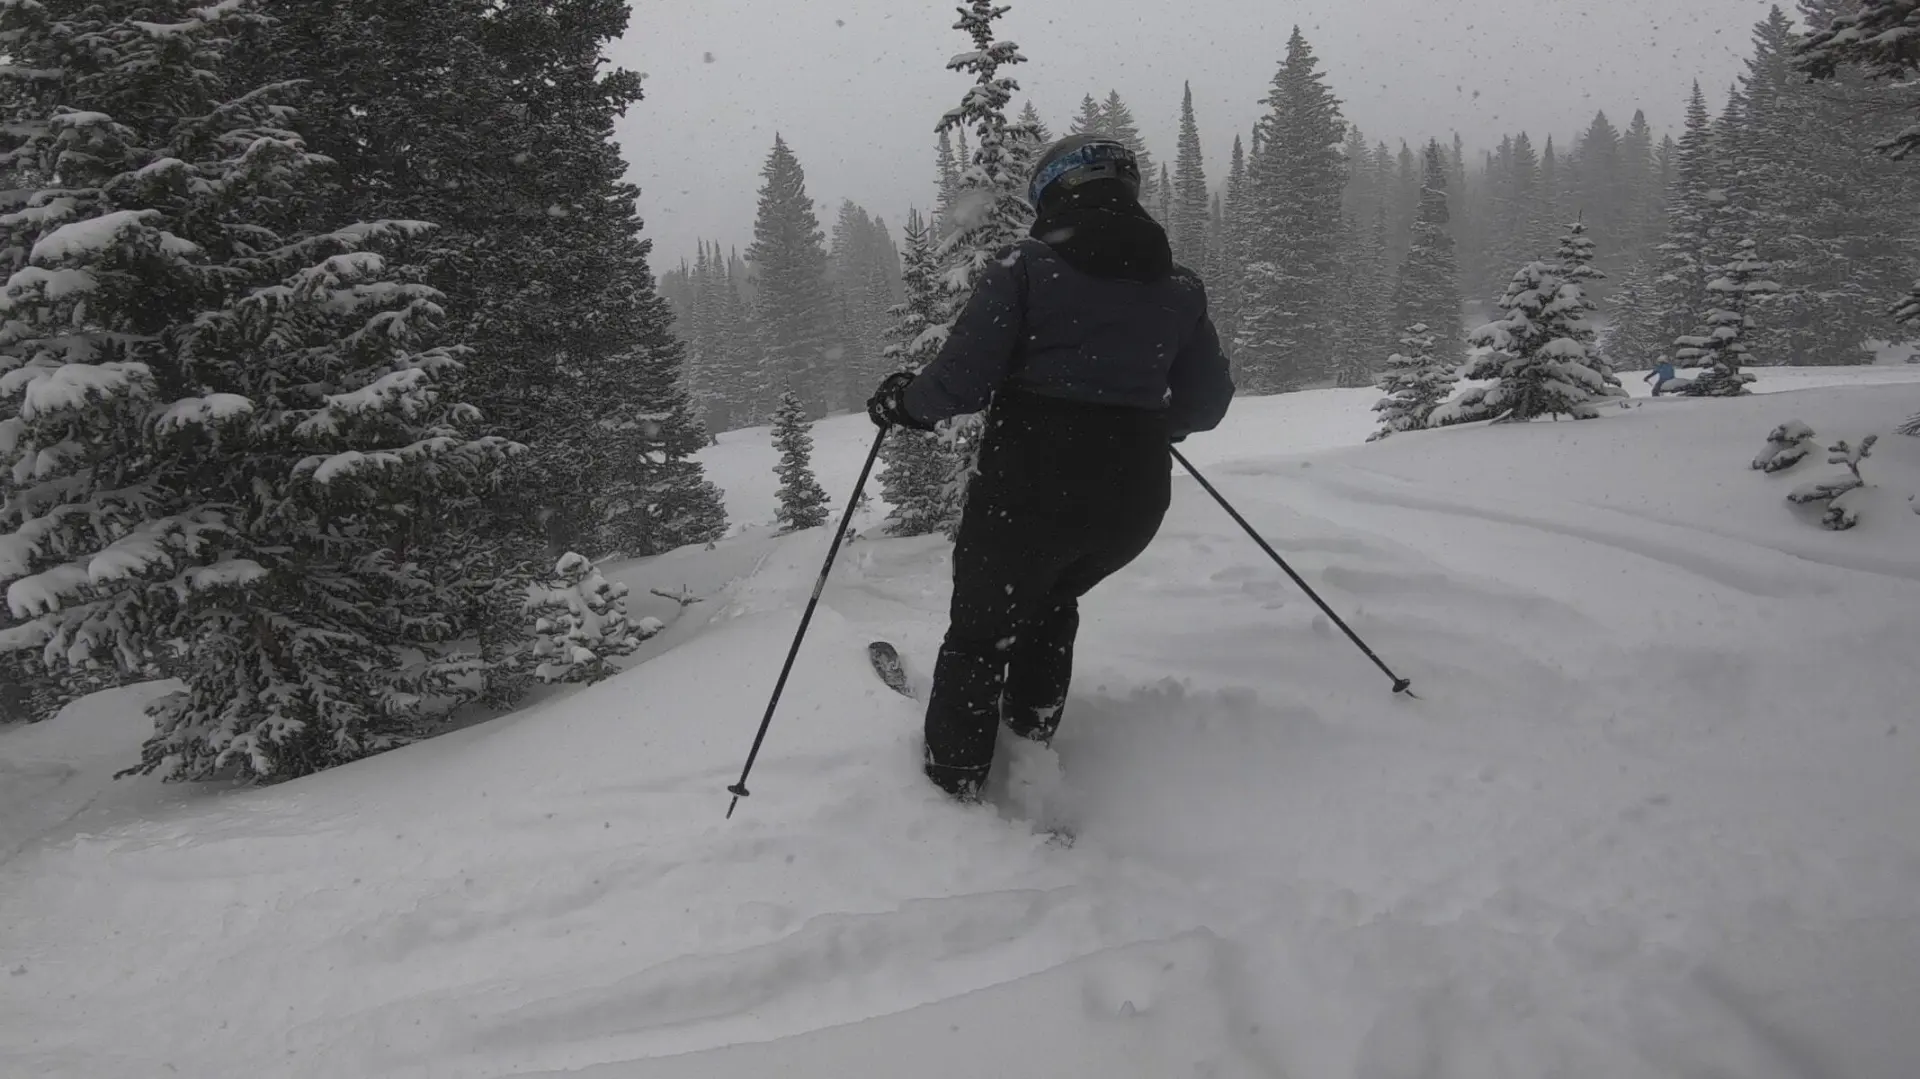 Lindsey skiing through powder while wearing all of her ski gear